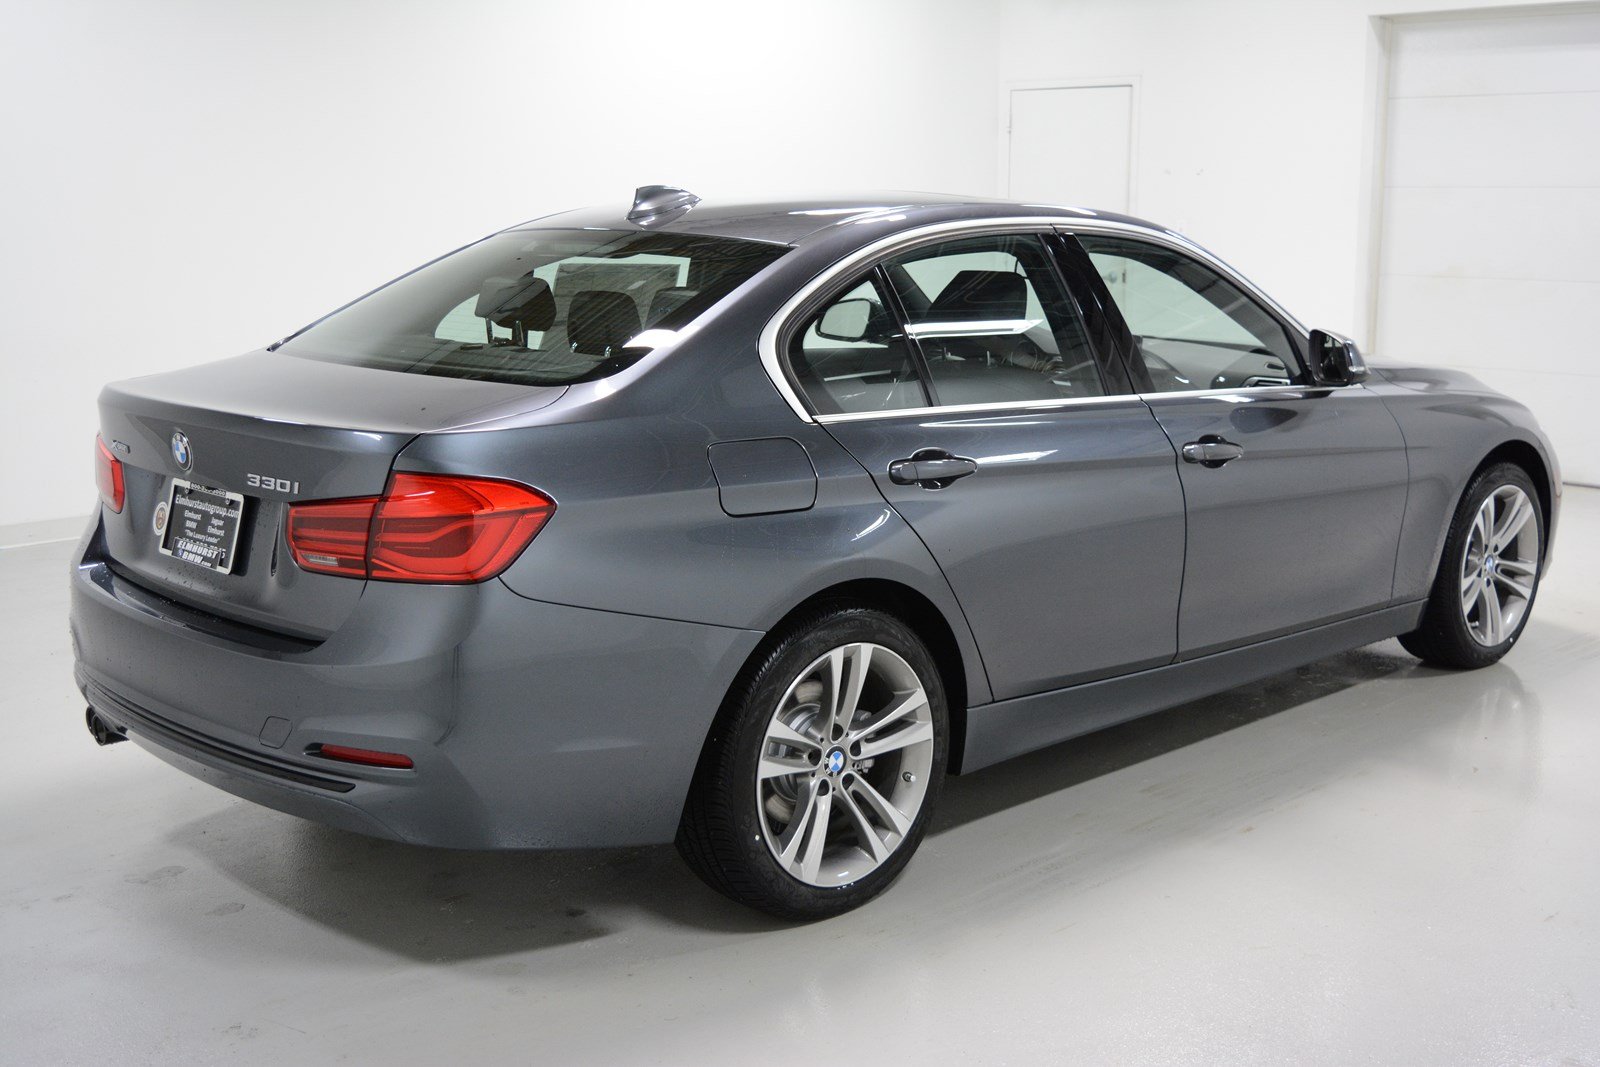 PreOwned 2018 BMW 3 Series 330i xDrive 4dr Car in